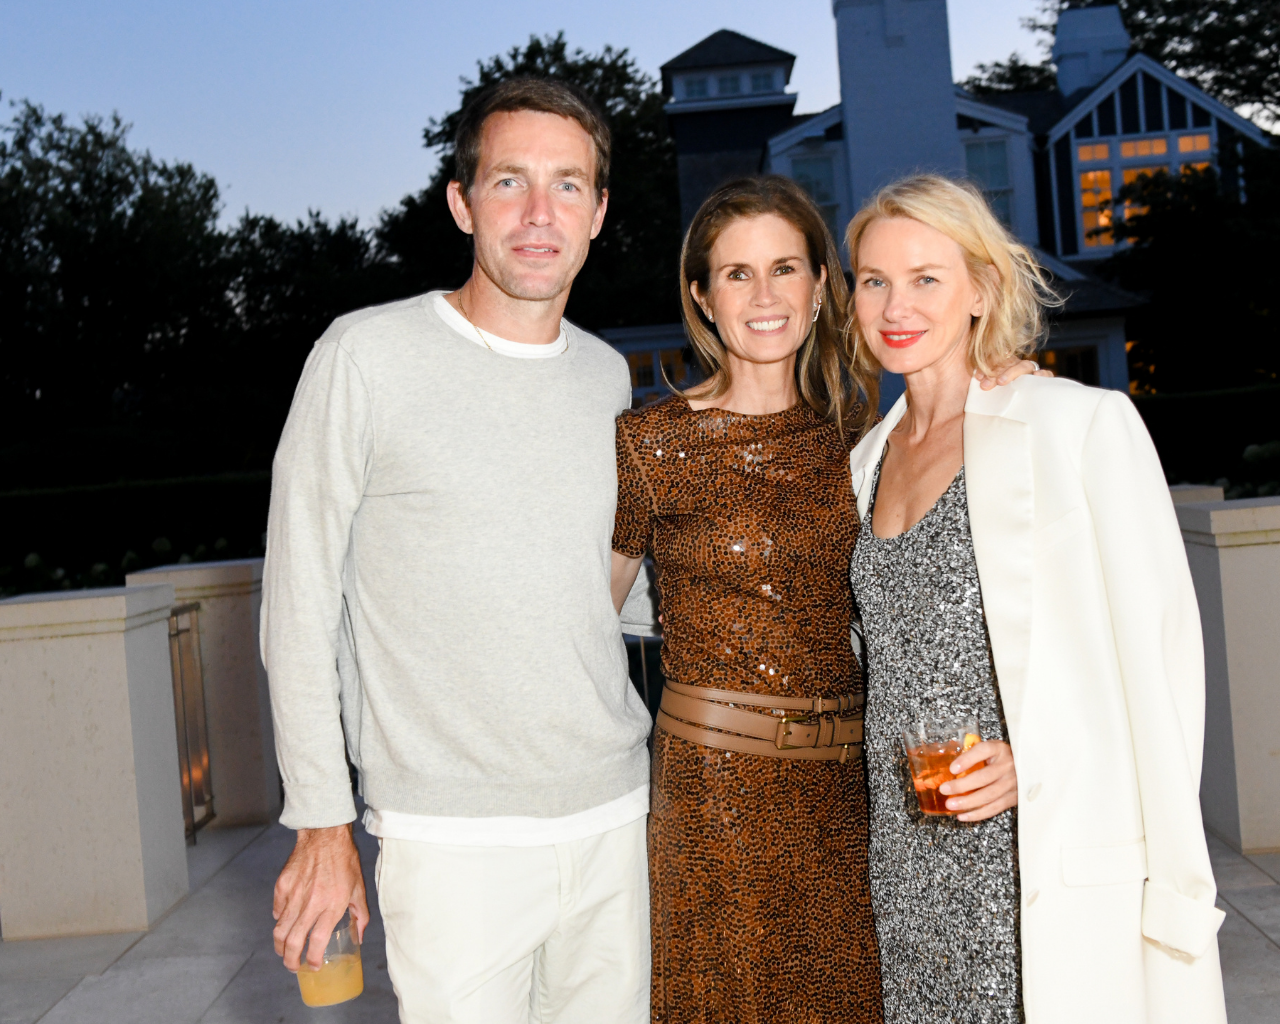 Michael Kors Celebrated 40 Years with Naomi Watts and Lizzie Tisch